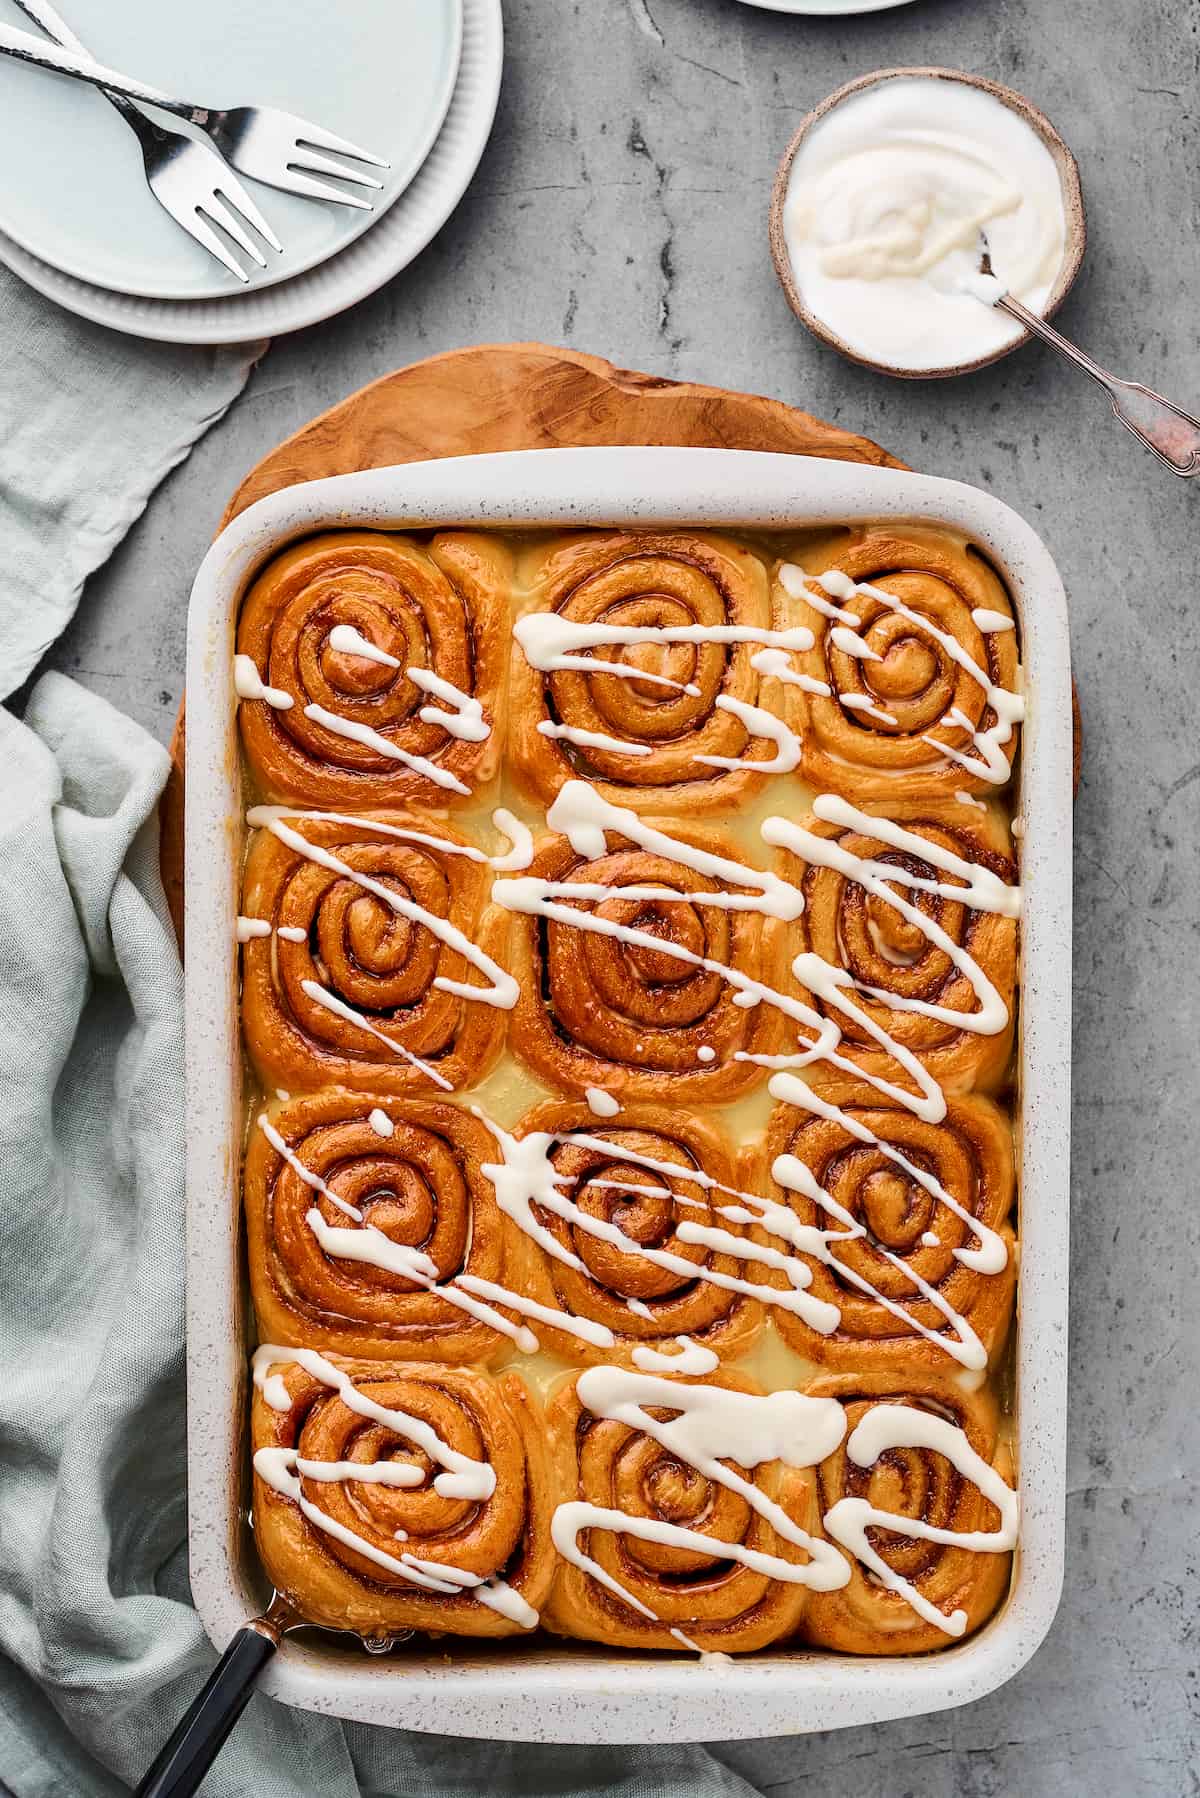 A pan of baked cinnamon rolls drizzled with icing.